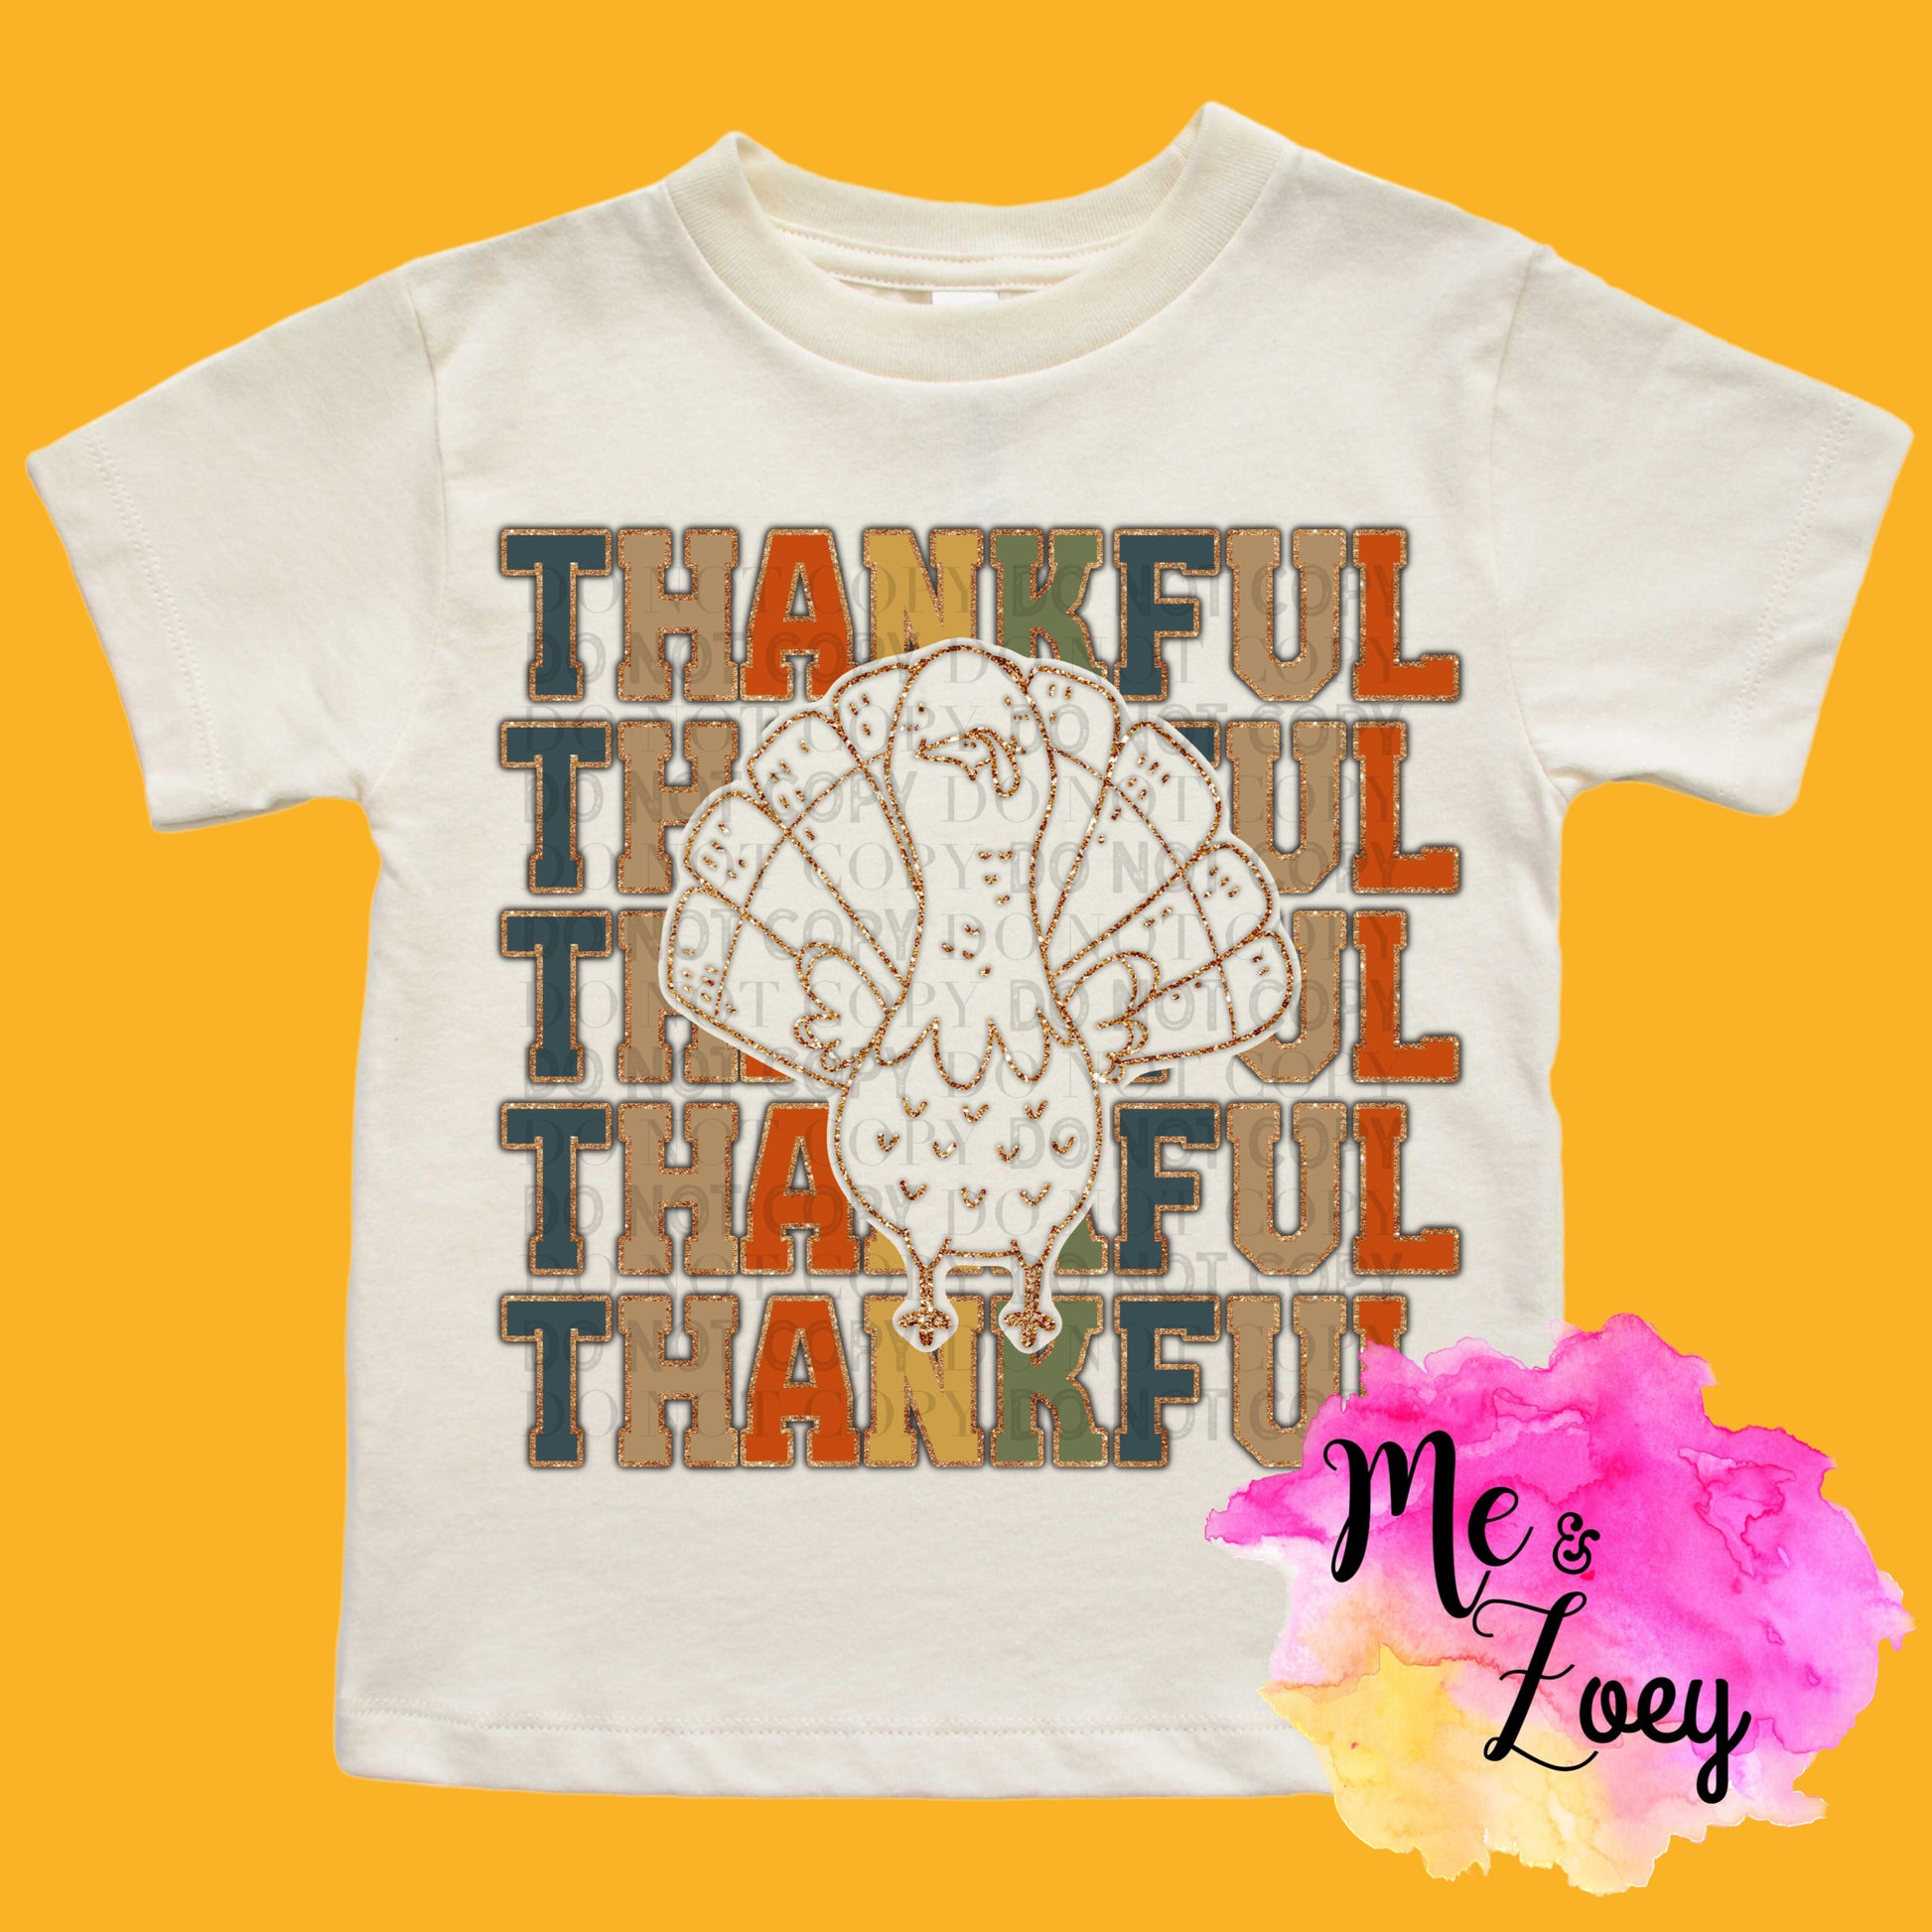 Thankful Graphic Tee - MeAndZoey